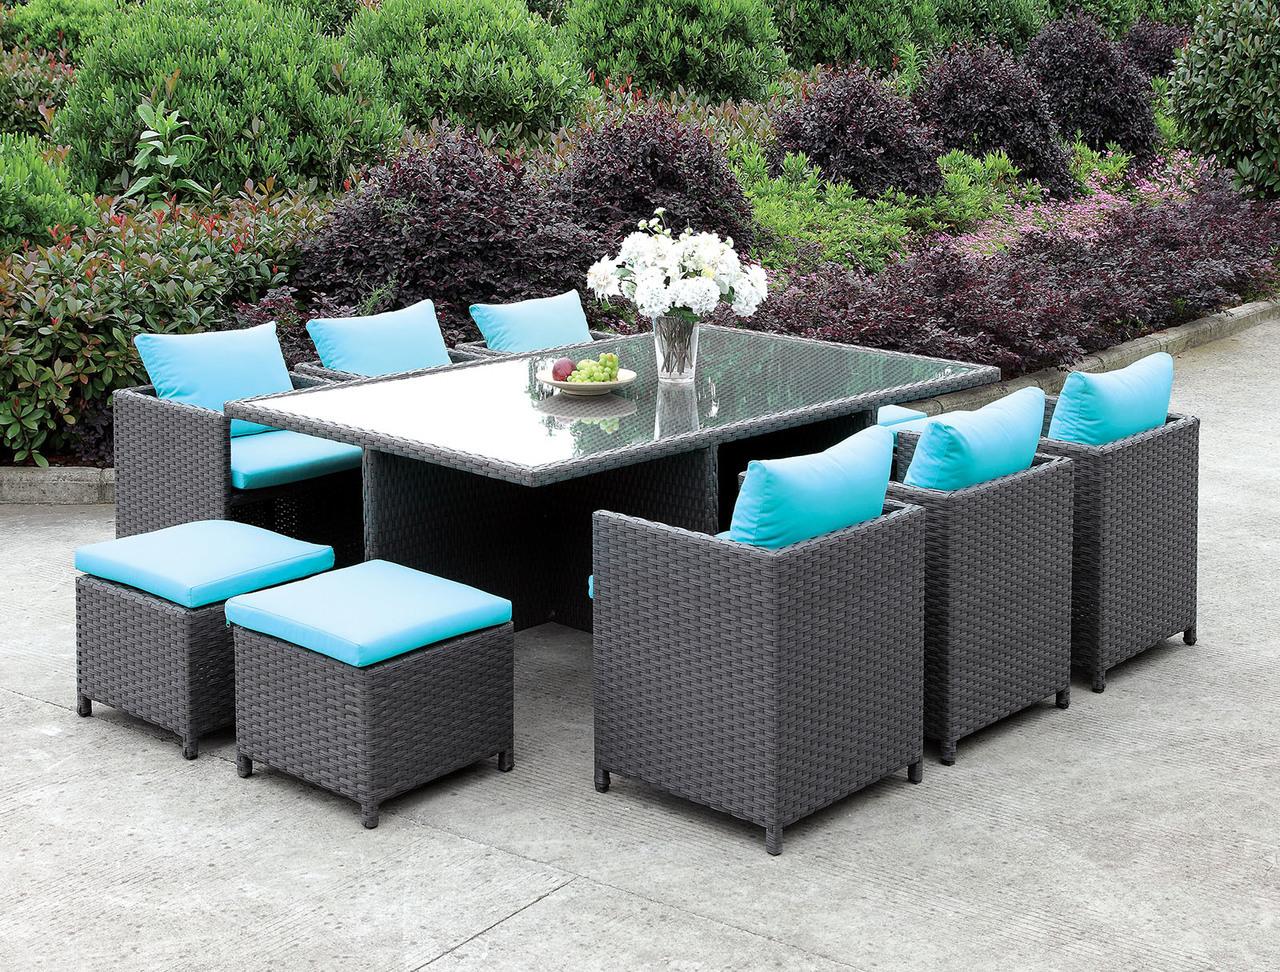 Contemporary Outdoor Dining Set ASHANTI CM-OT2127 CM-OT2127 in Turquoise, Brown Fabric